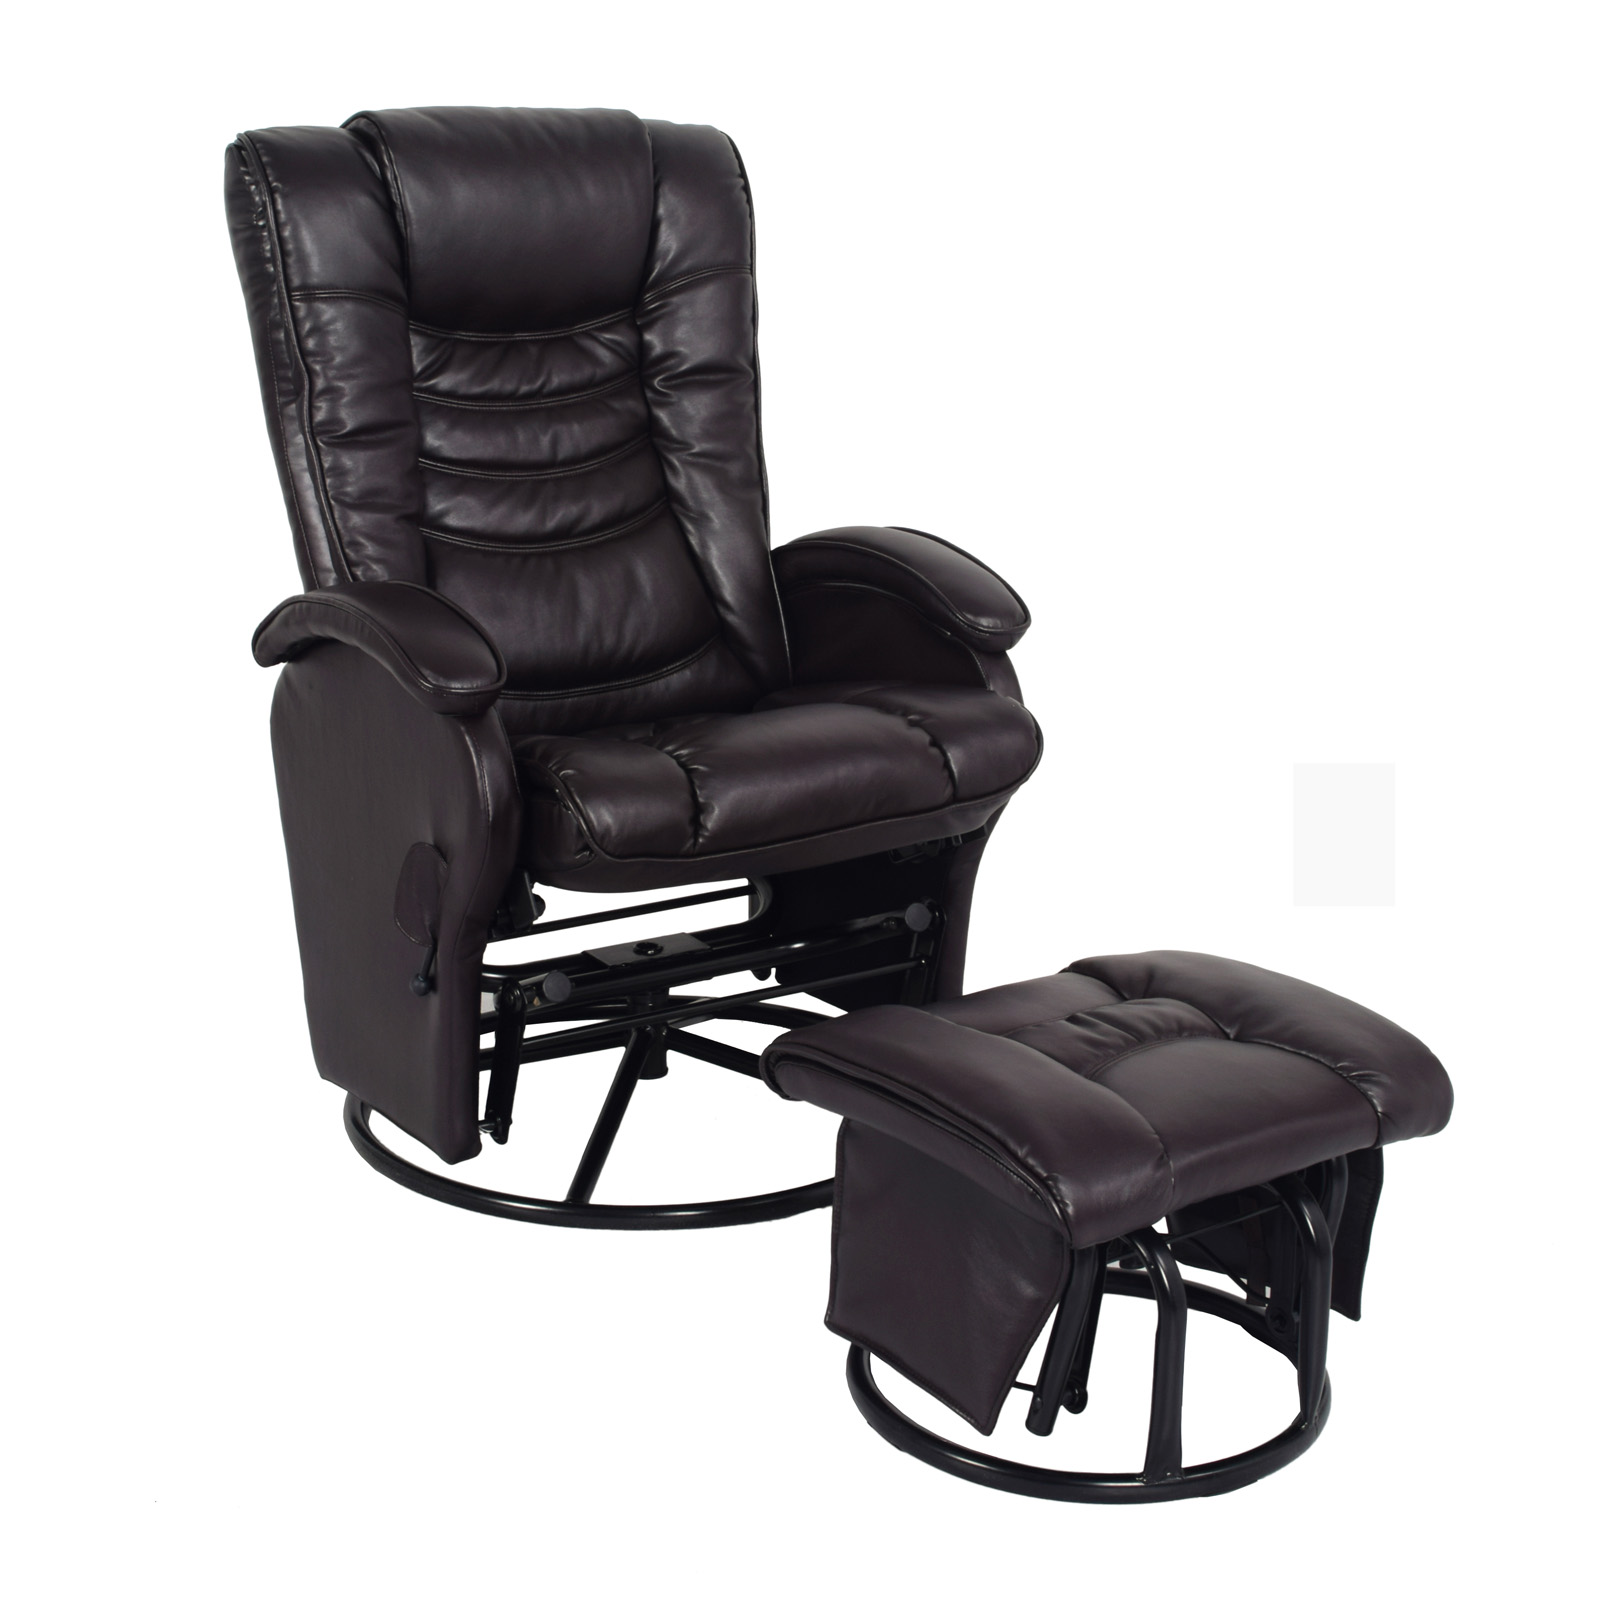 Leather Glider Chair Free, Shermag Rocking Chair Parts